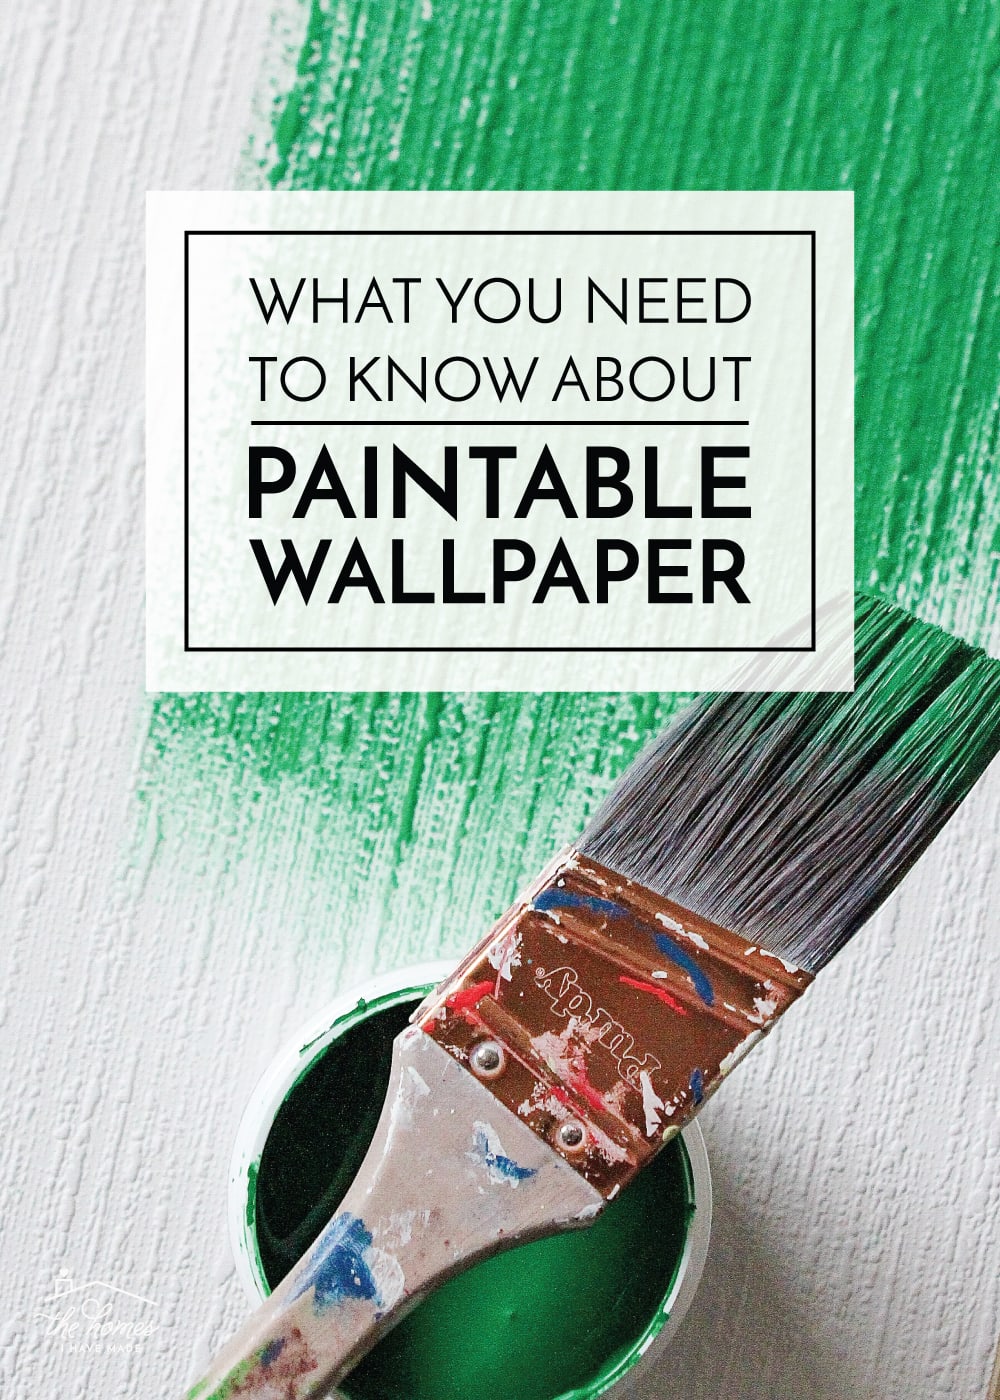 What You Need To Know About Paintable Wallpaper - The Homes I Have Made